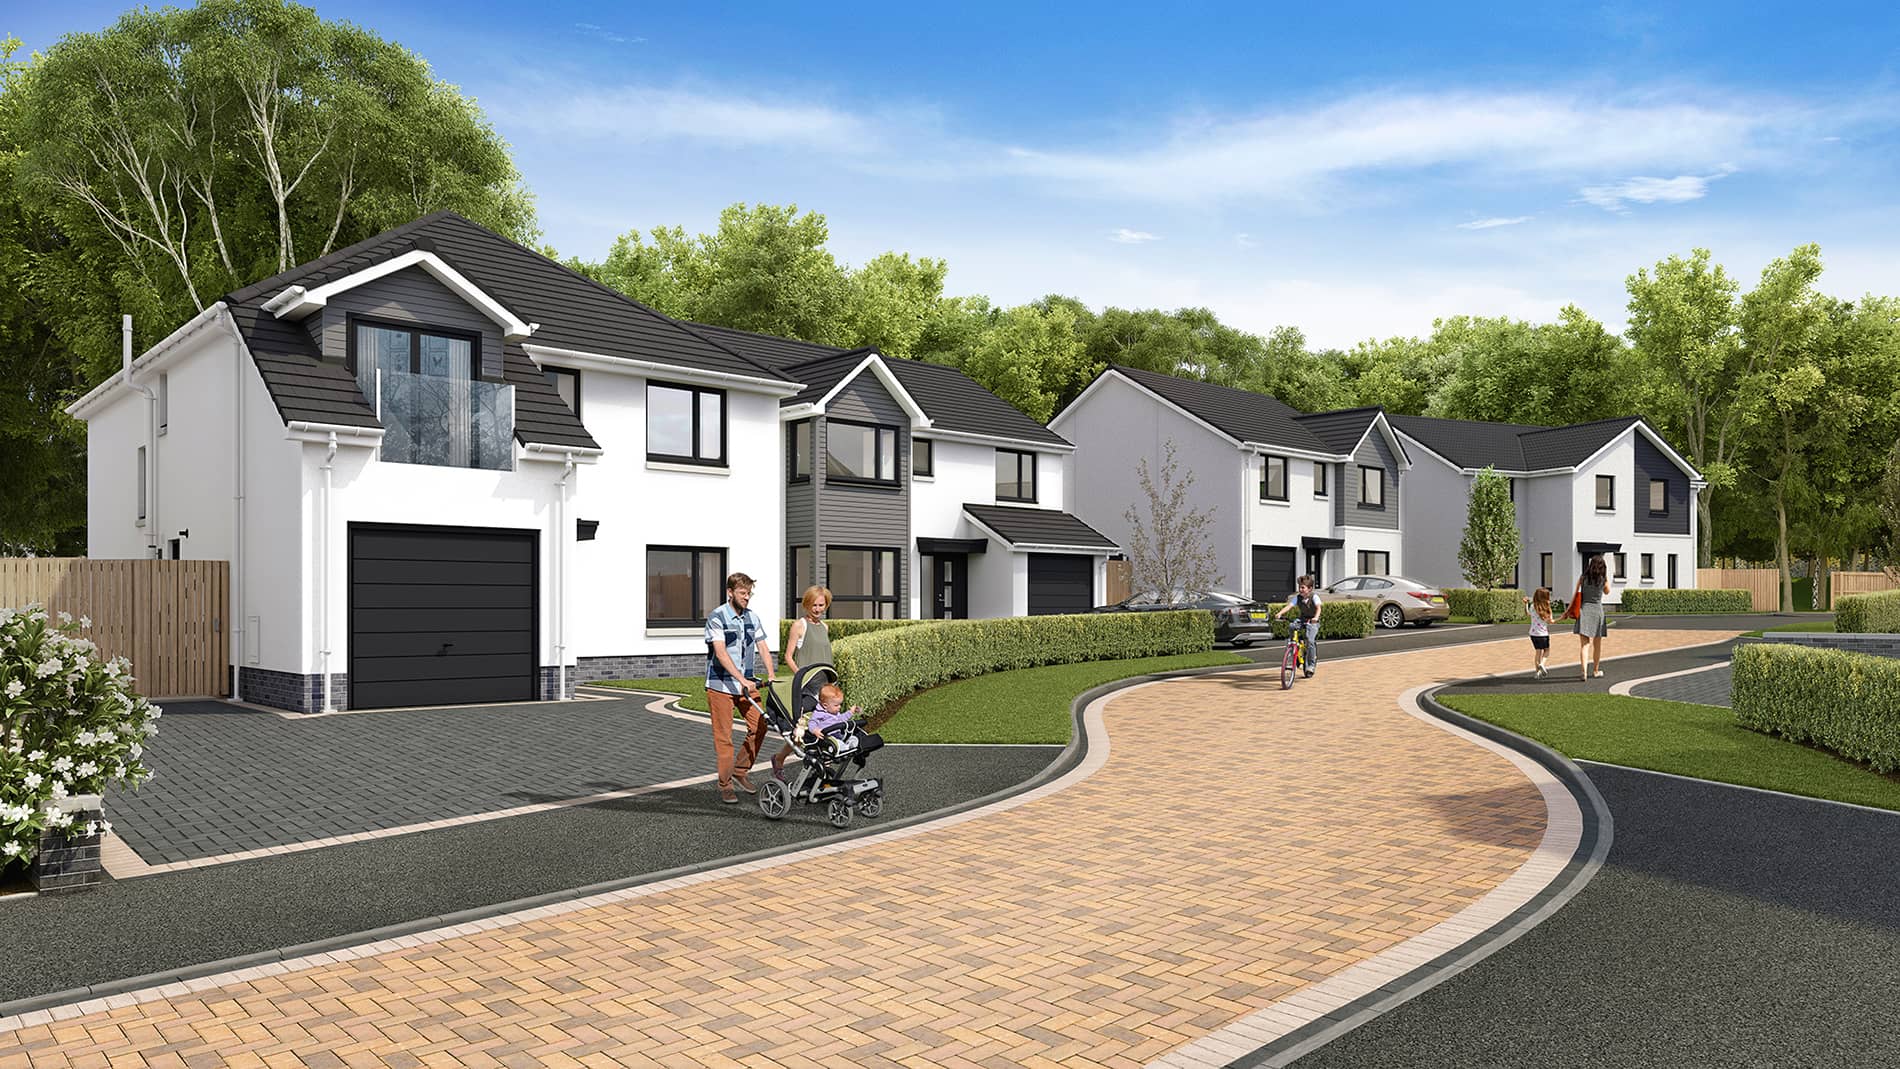 Campion Homes records 'robust' set of results amid challenging economic times